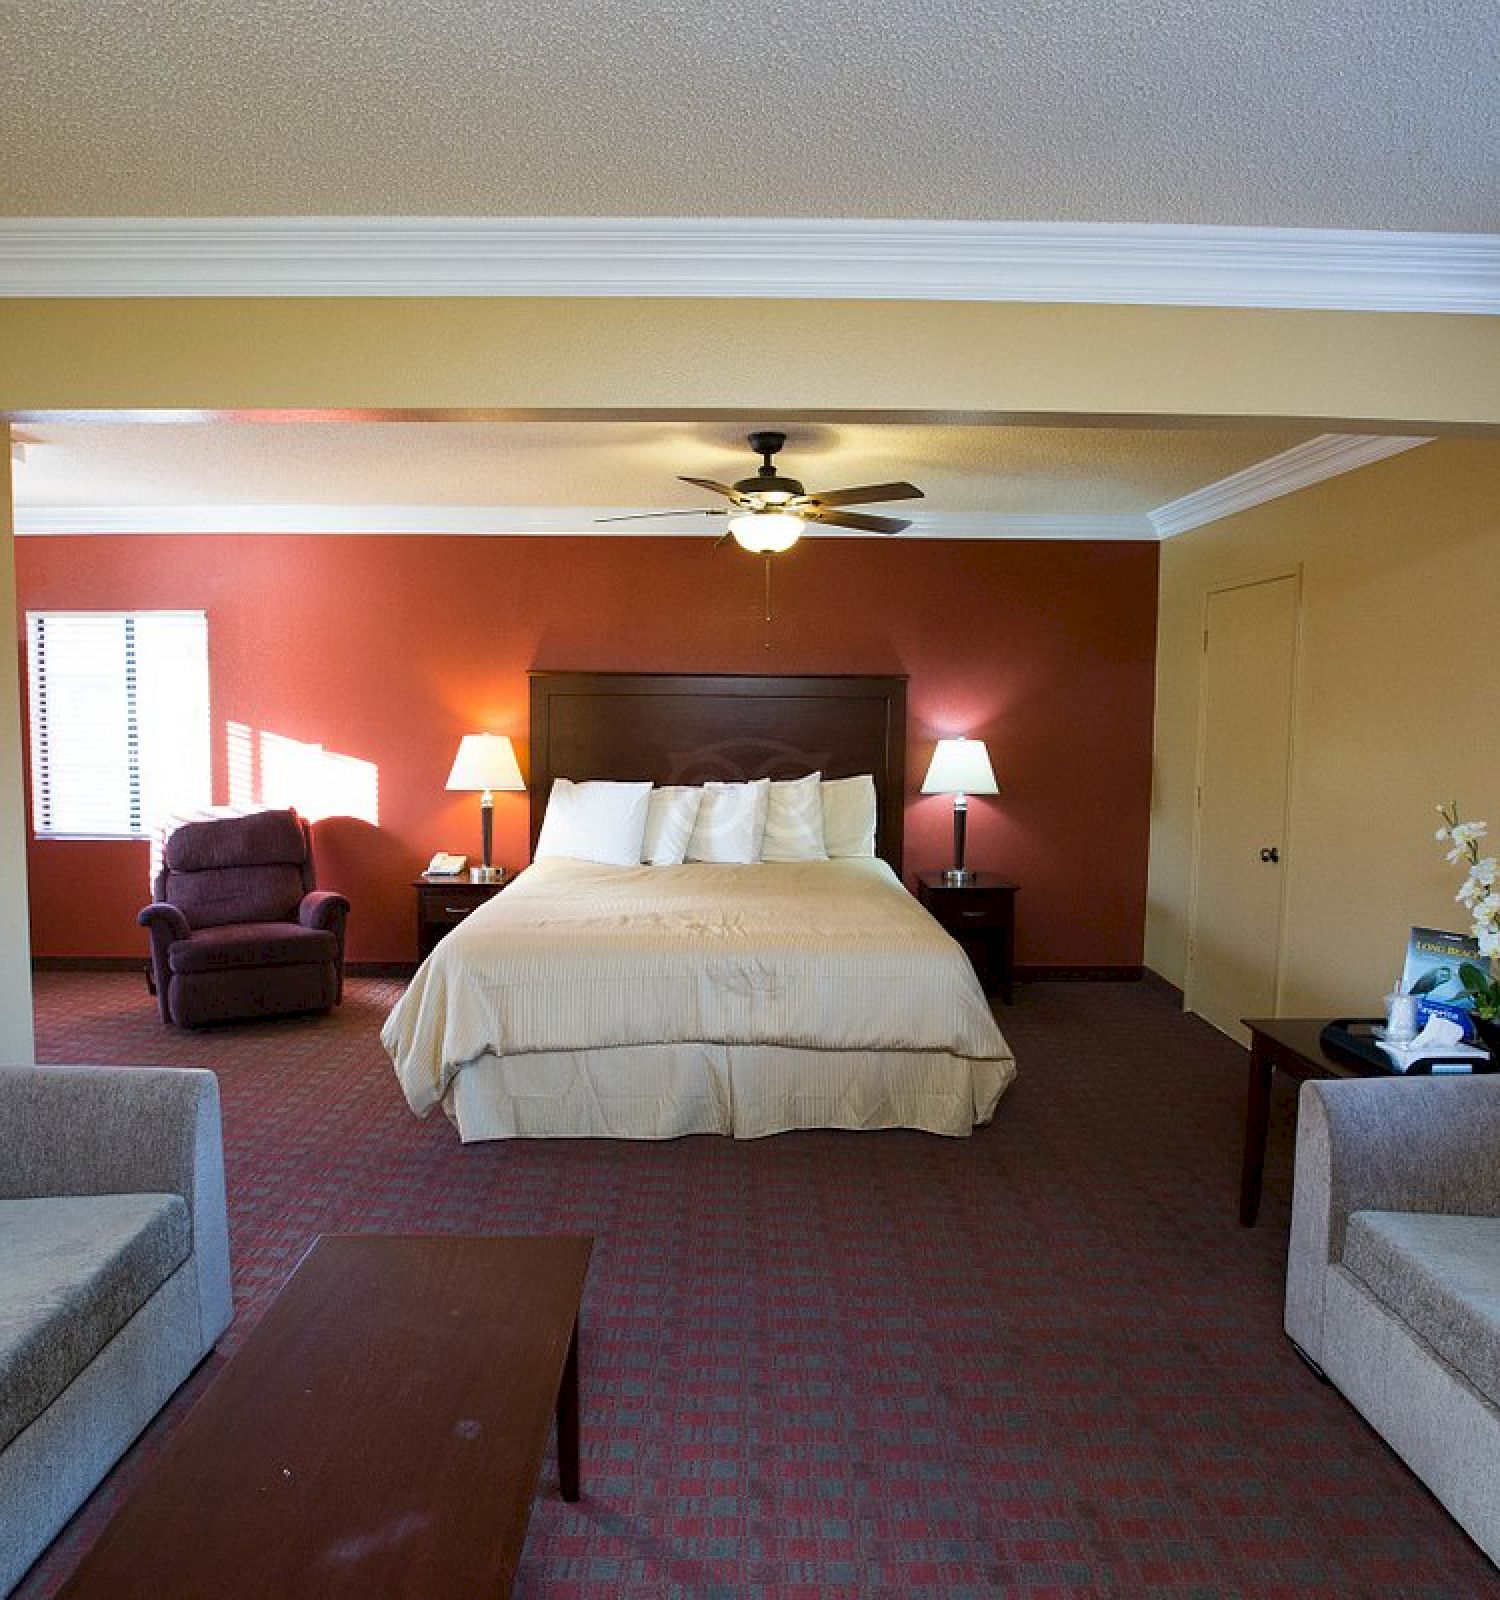 The image shows a spacious hotel room with a bed, two sofas, a coffee table, lamps, and a ceiling fan. It is well-lit with natural light.